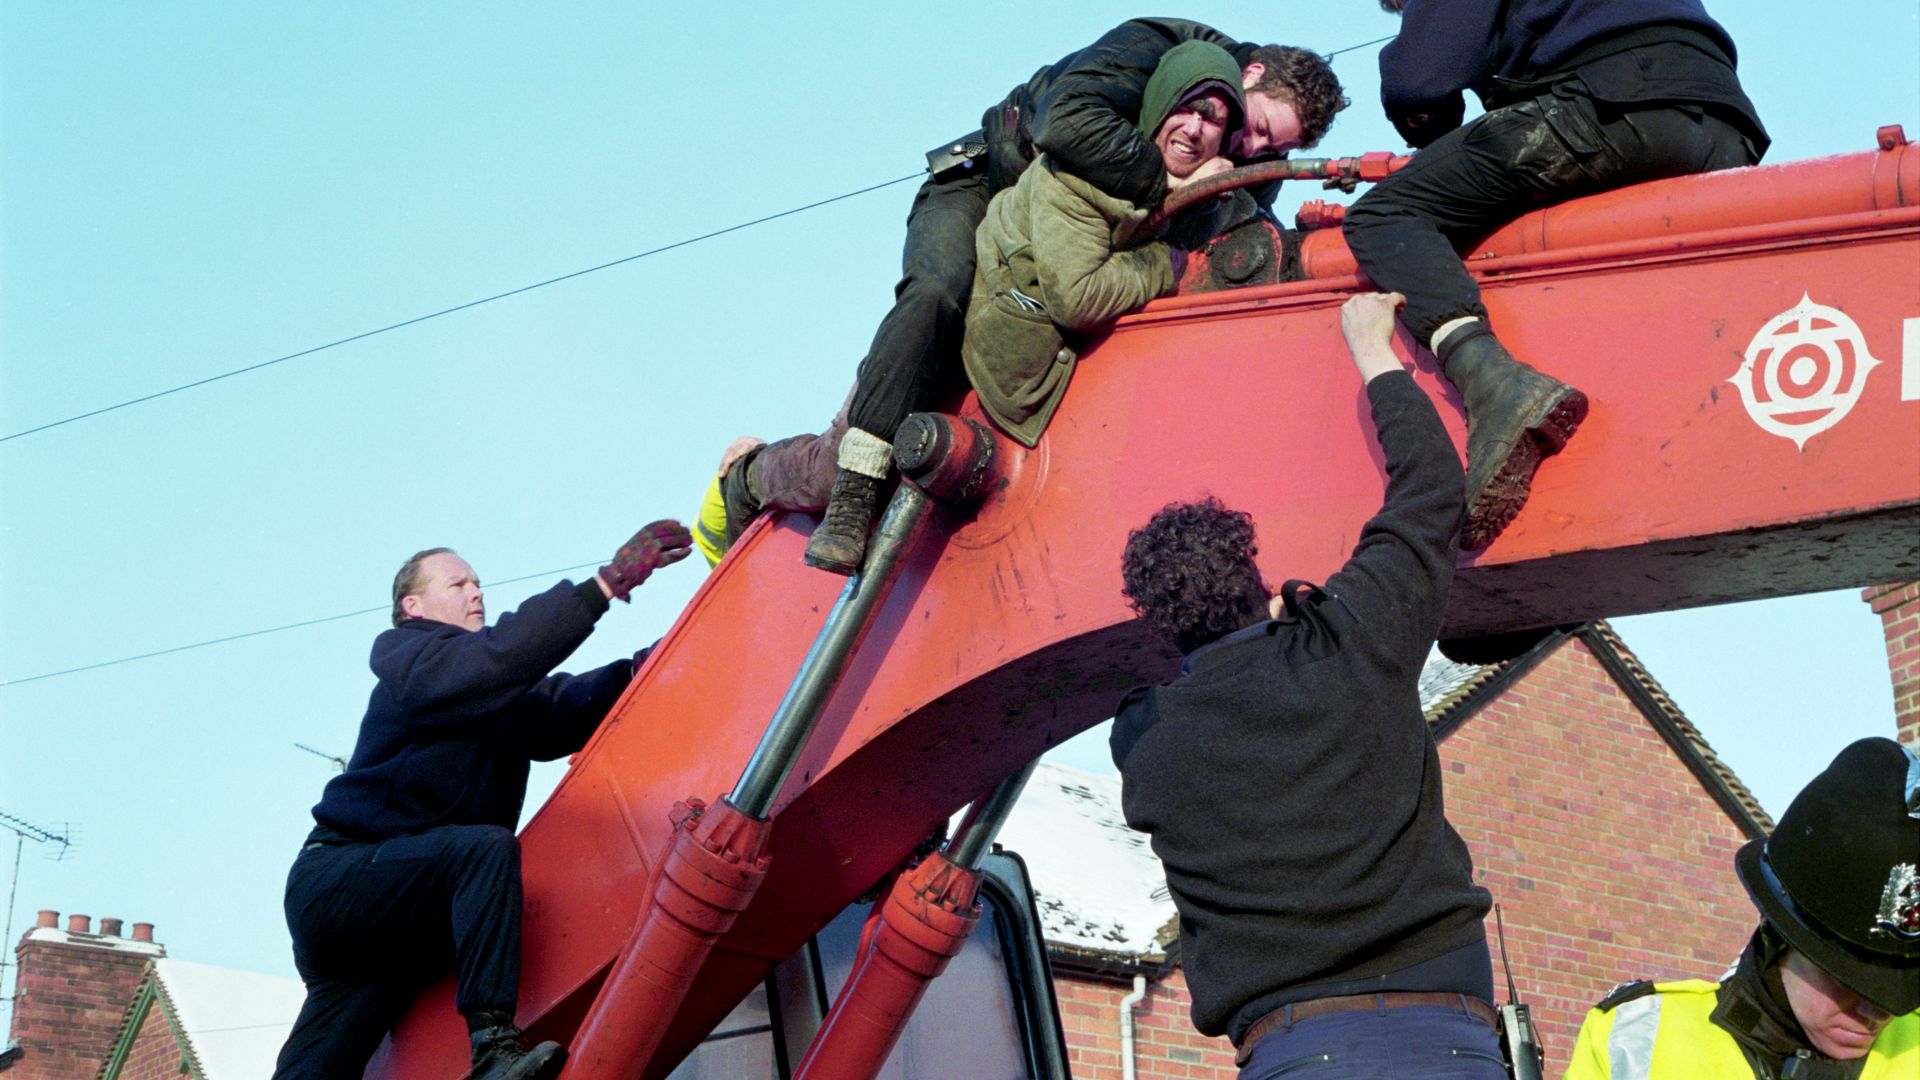 An activist is tackled by police machinery